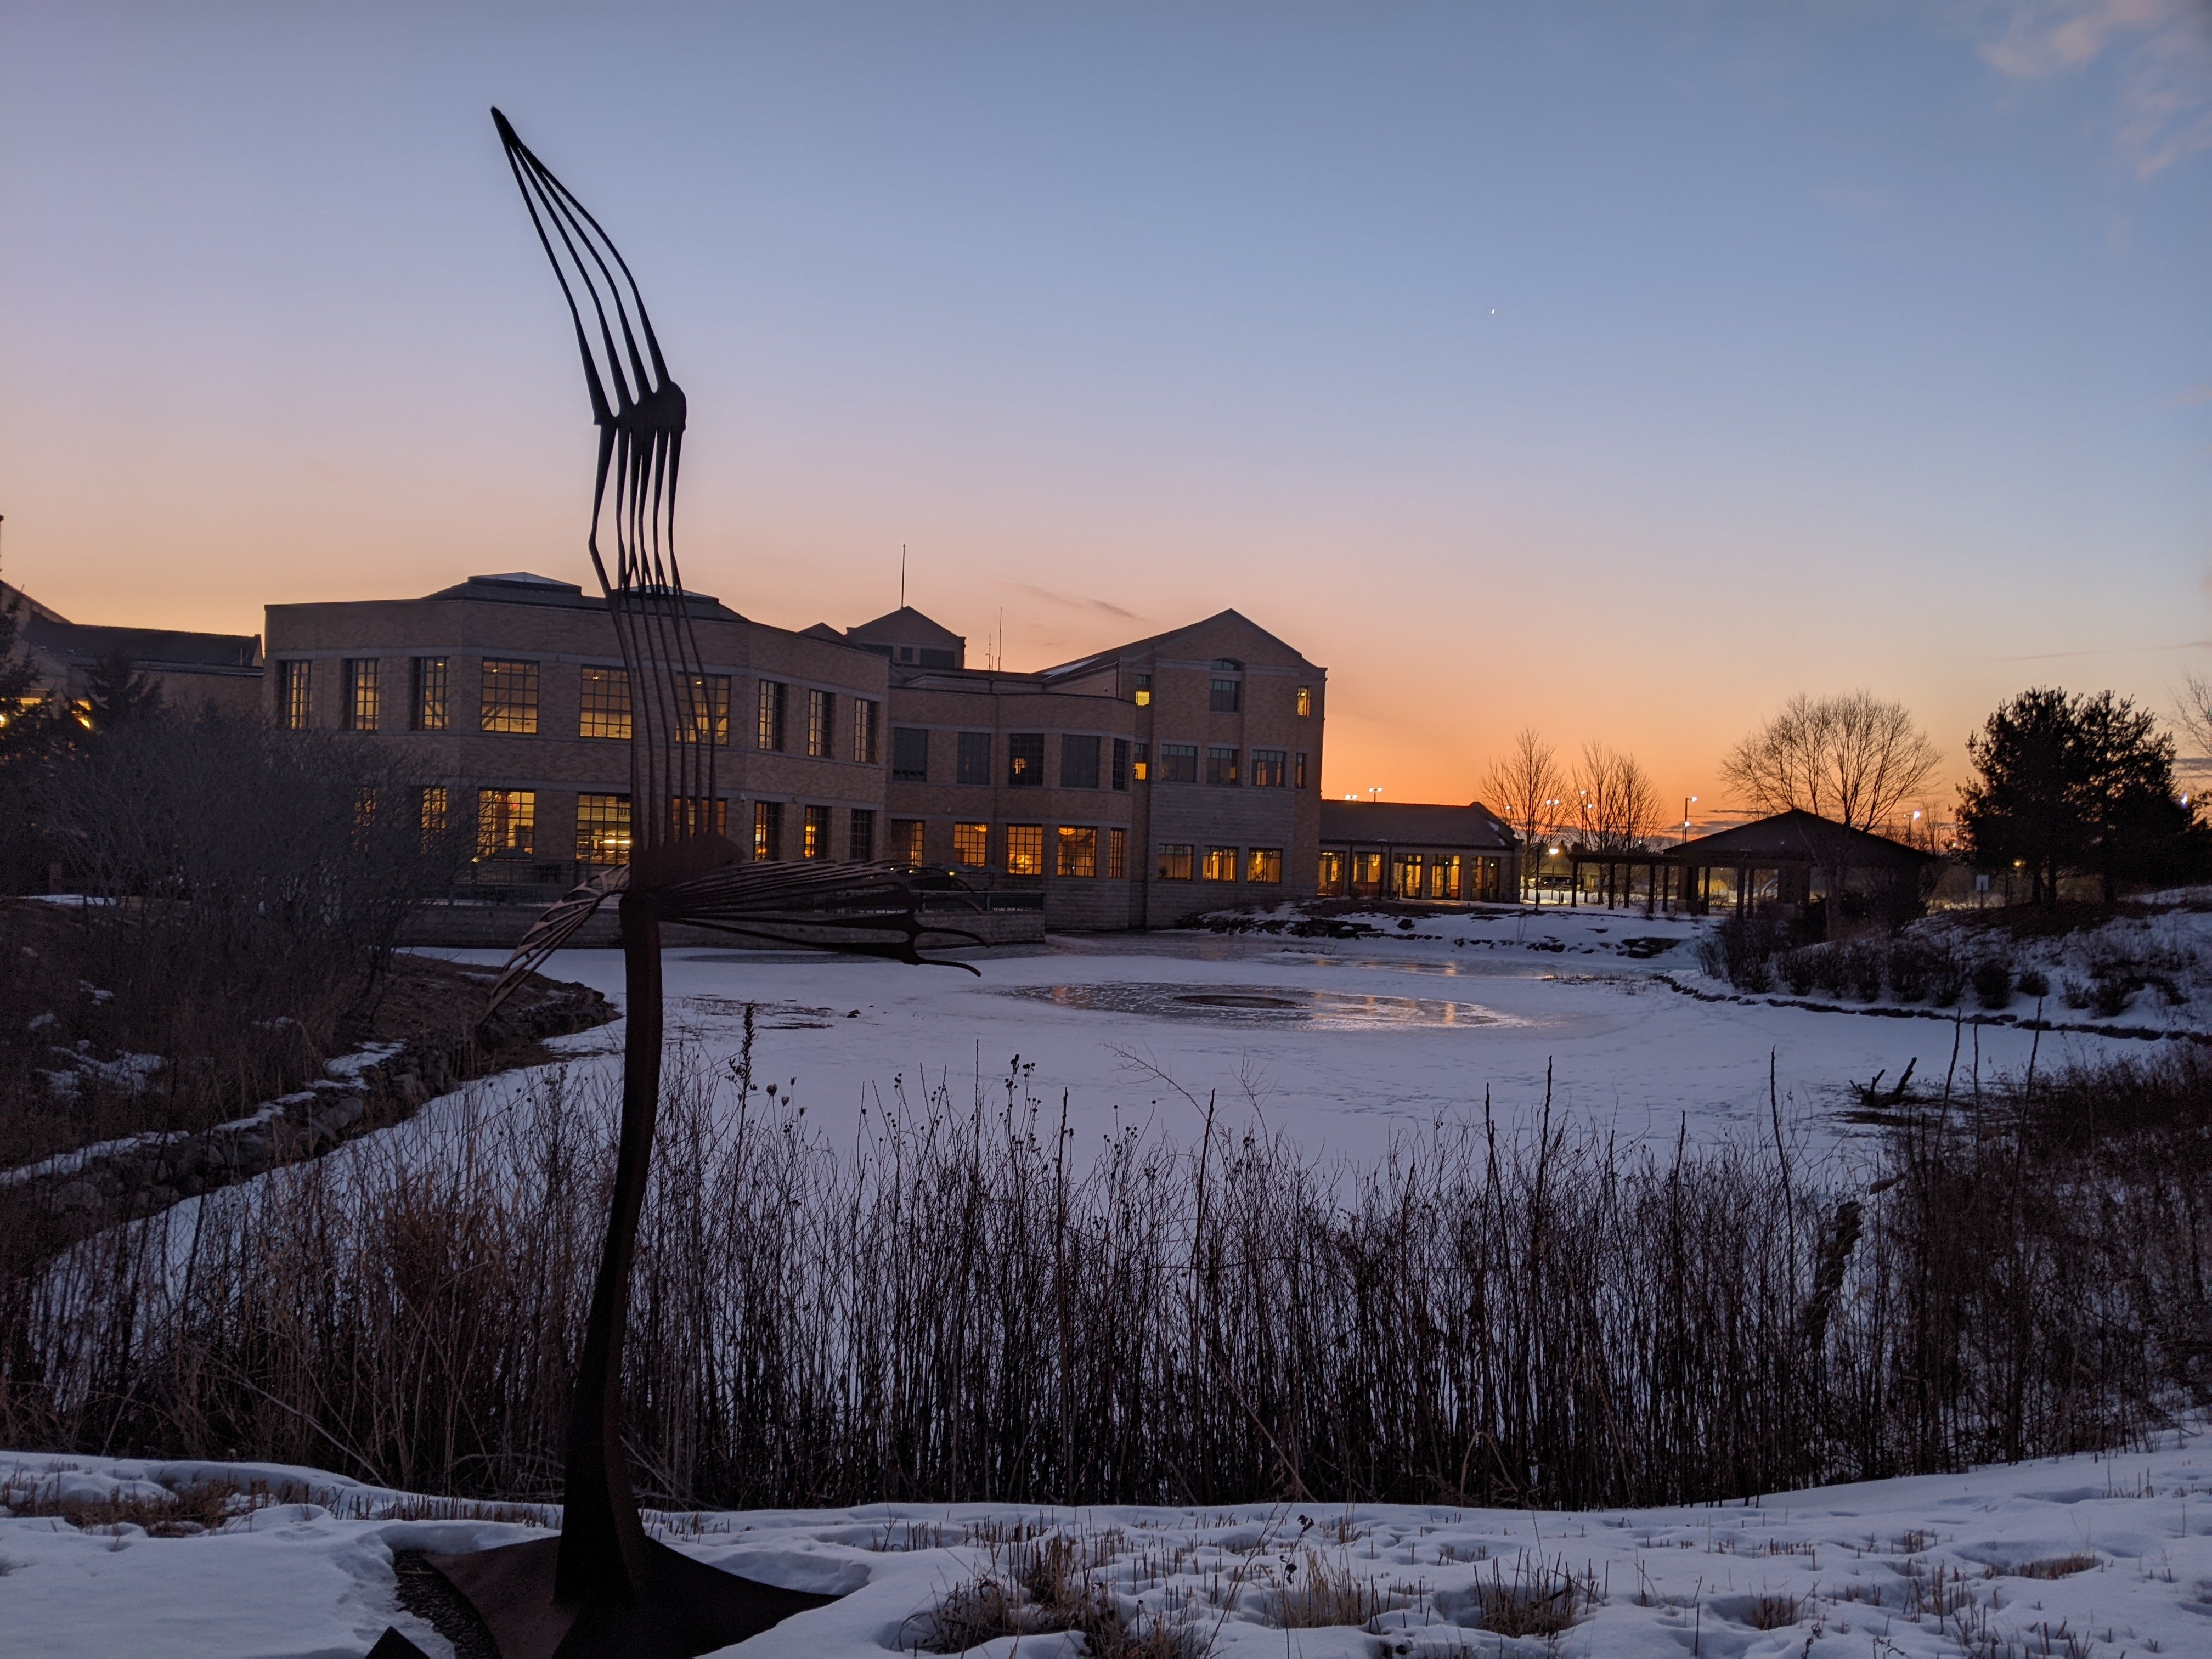 early morning winter sunrise with bldg and sculpture by pond 2-8-22